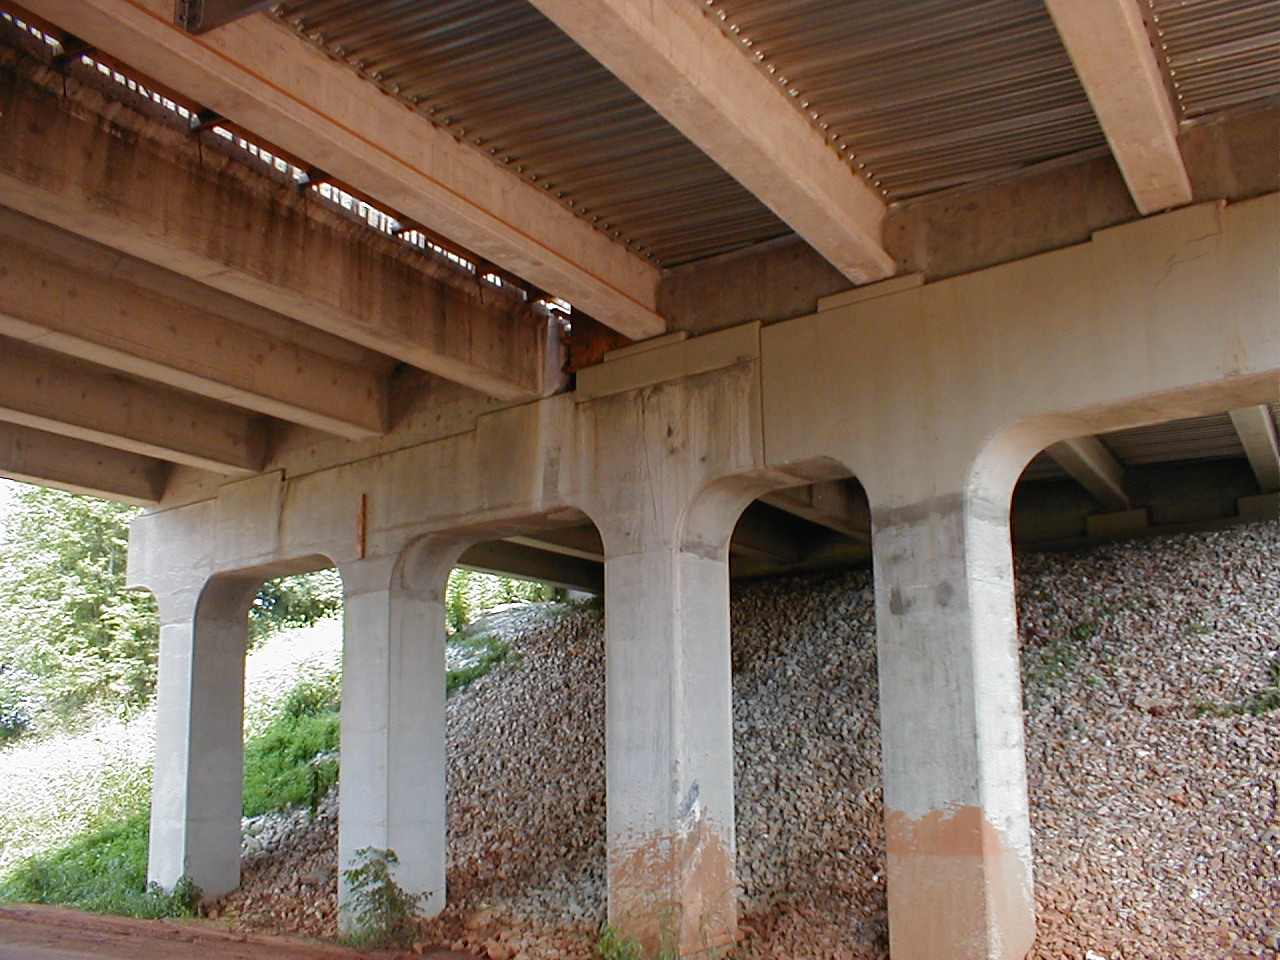 This shows the split of the old and new roadbed on the south bound bridge. It also shows the use of old and new supports.